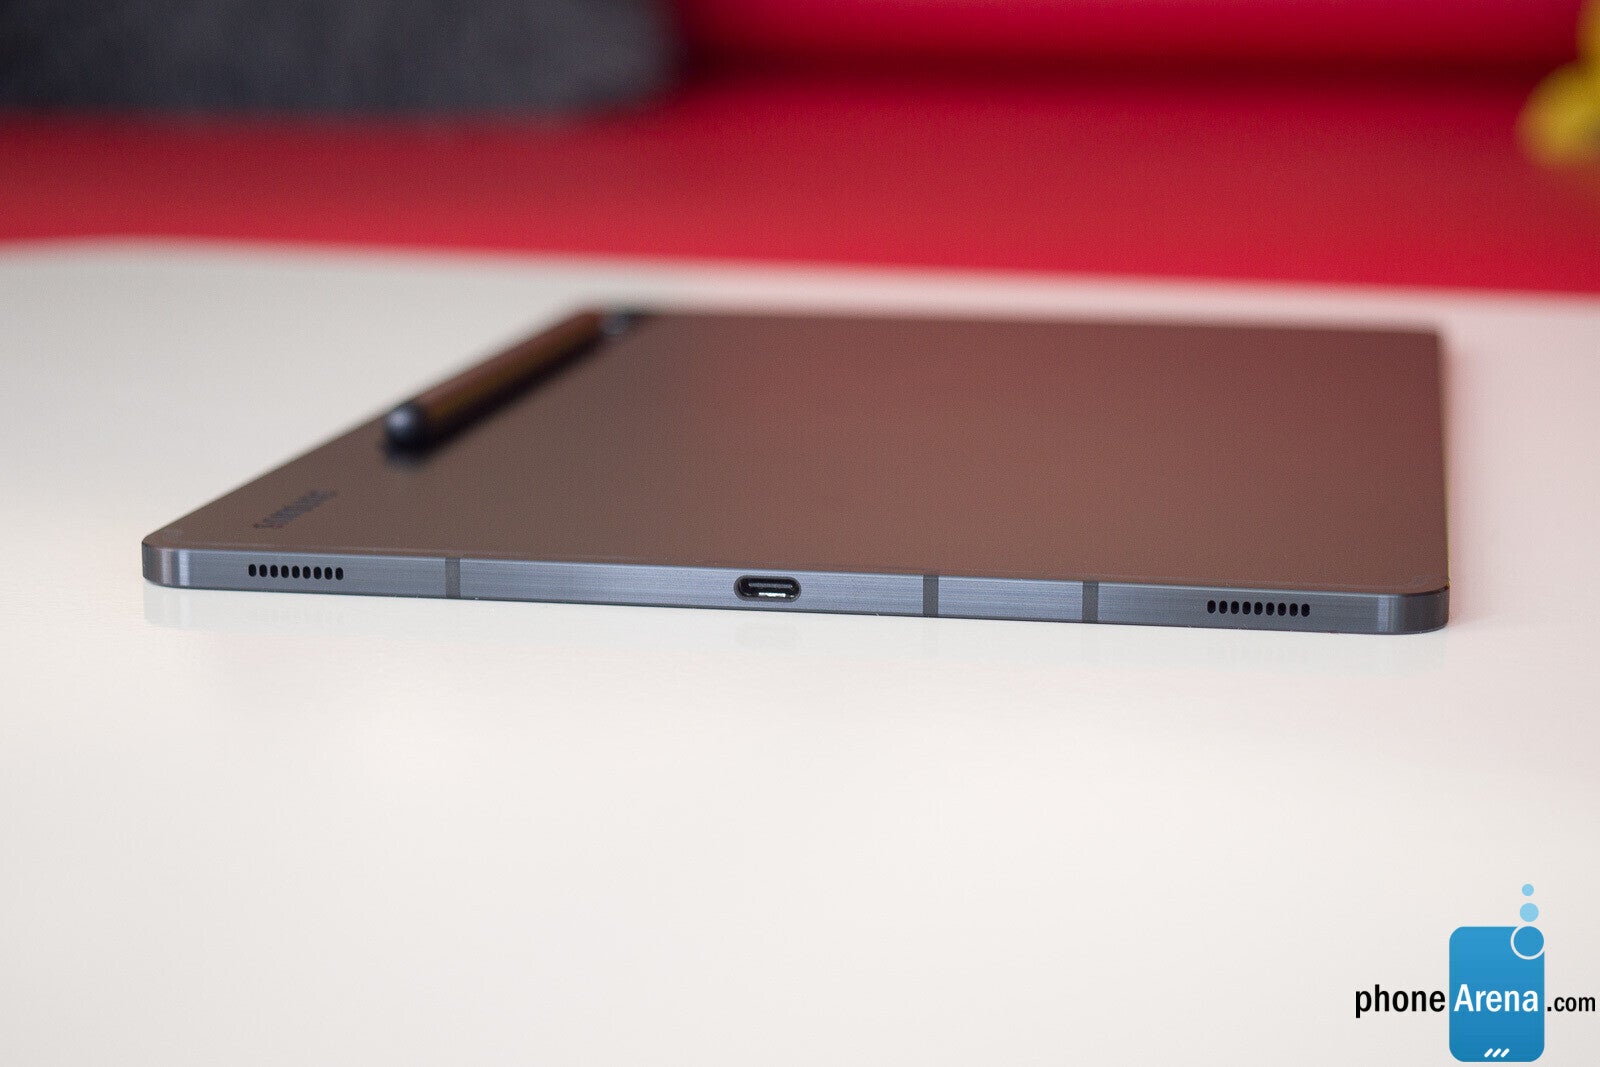 Most flagship tablets have side-firing speakers - We asked, you answered: The perfect tablet is...